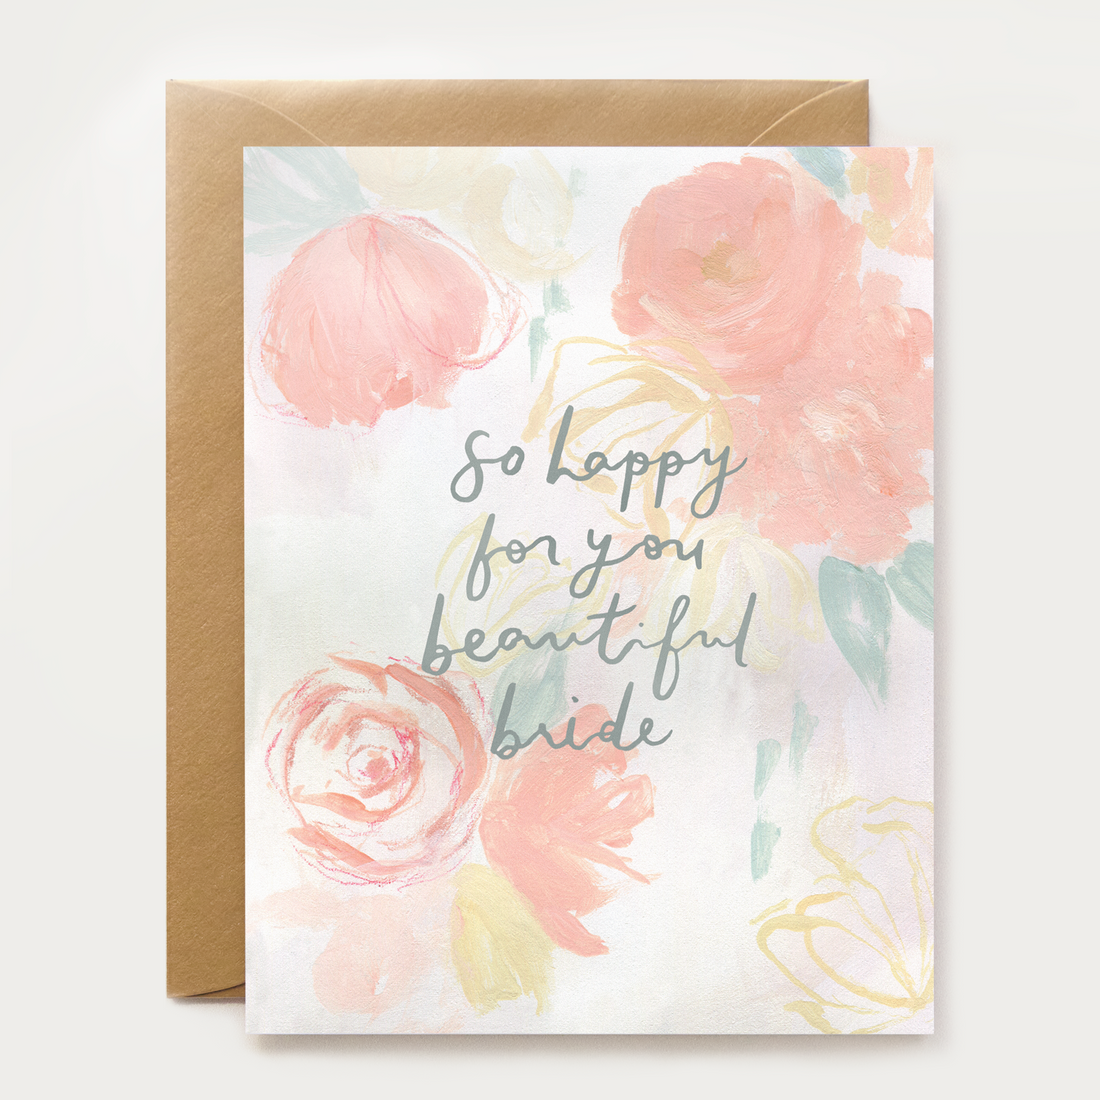 So Happy For You Beautiful Bride Card